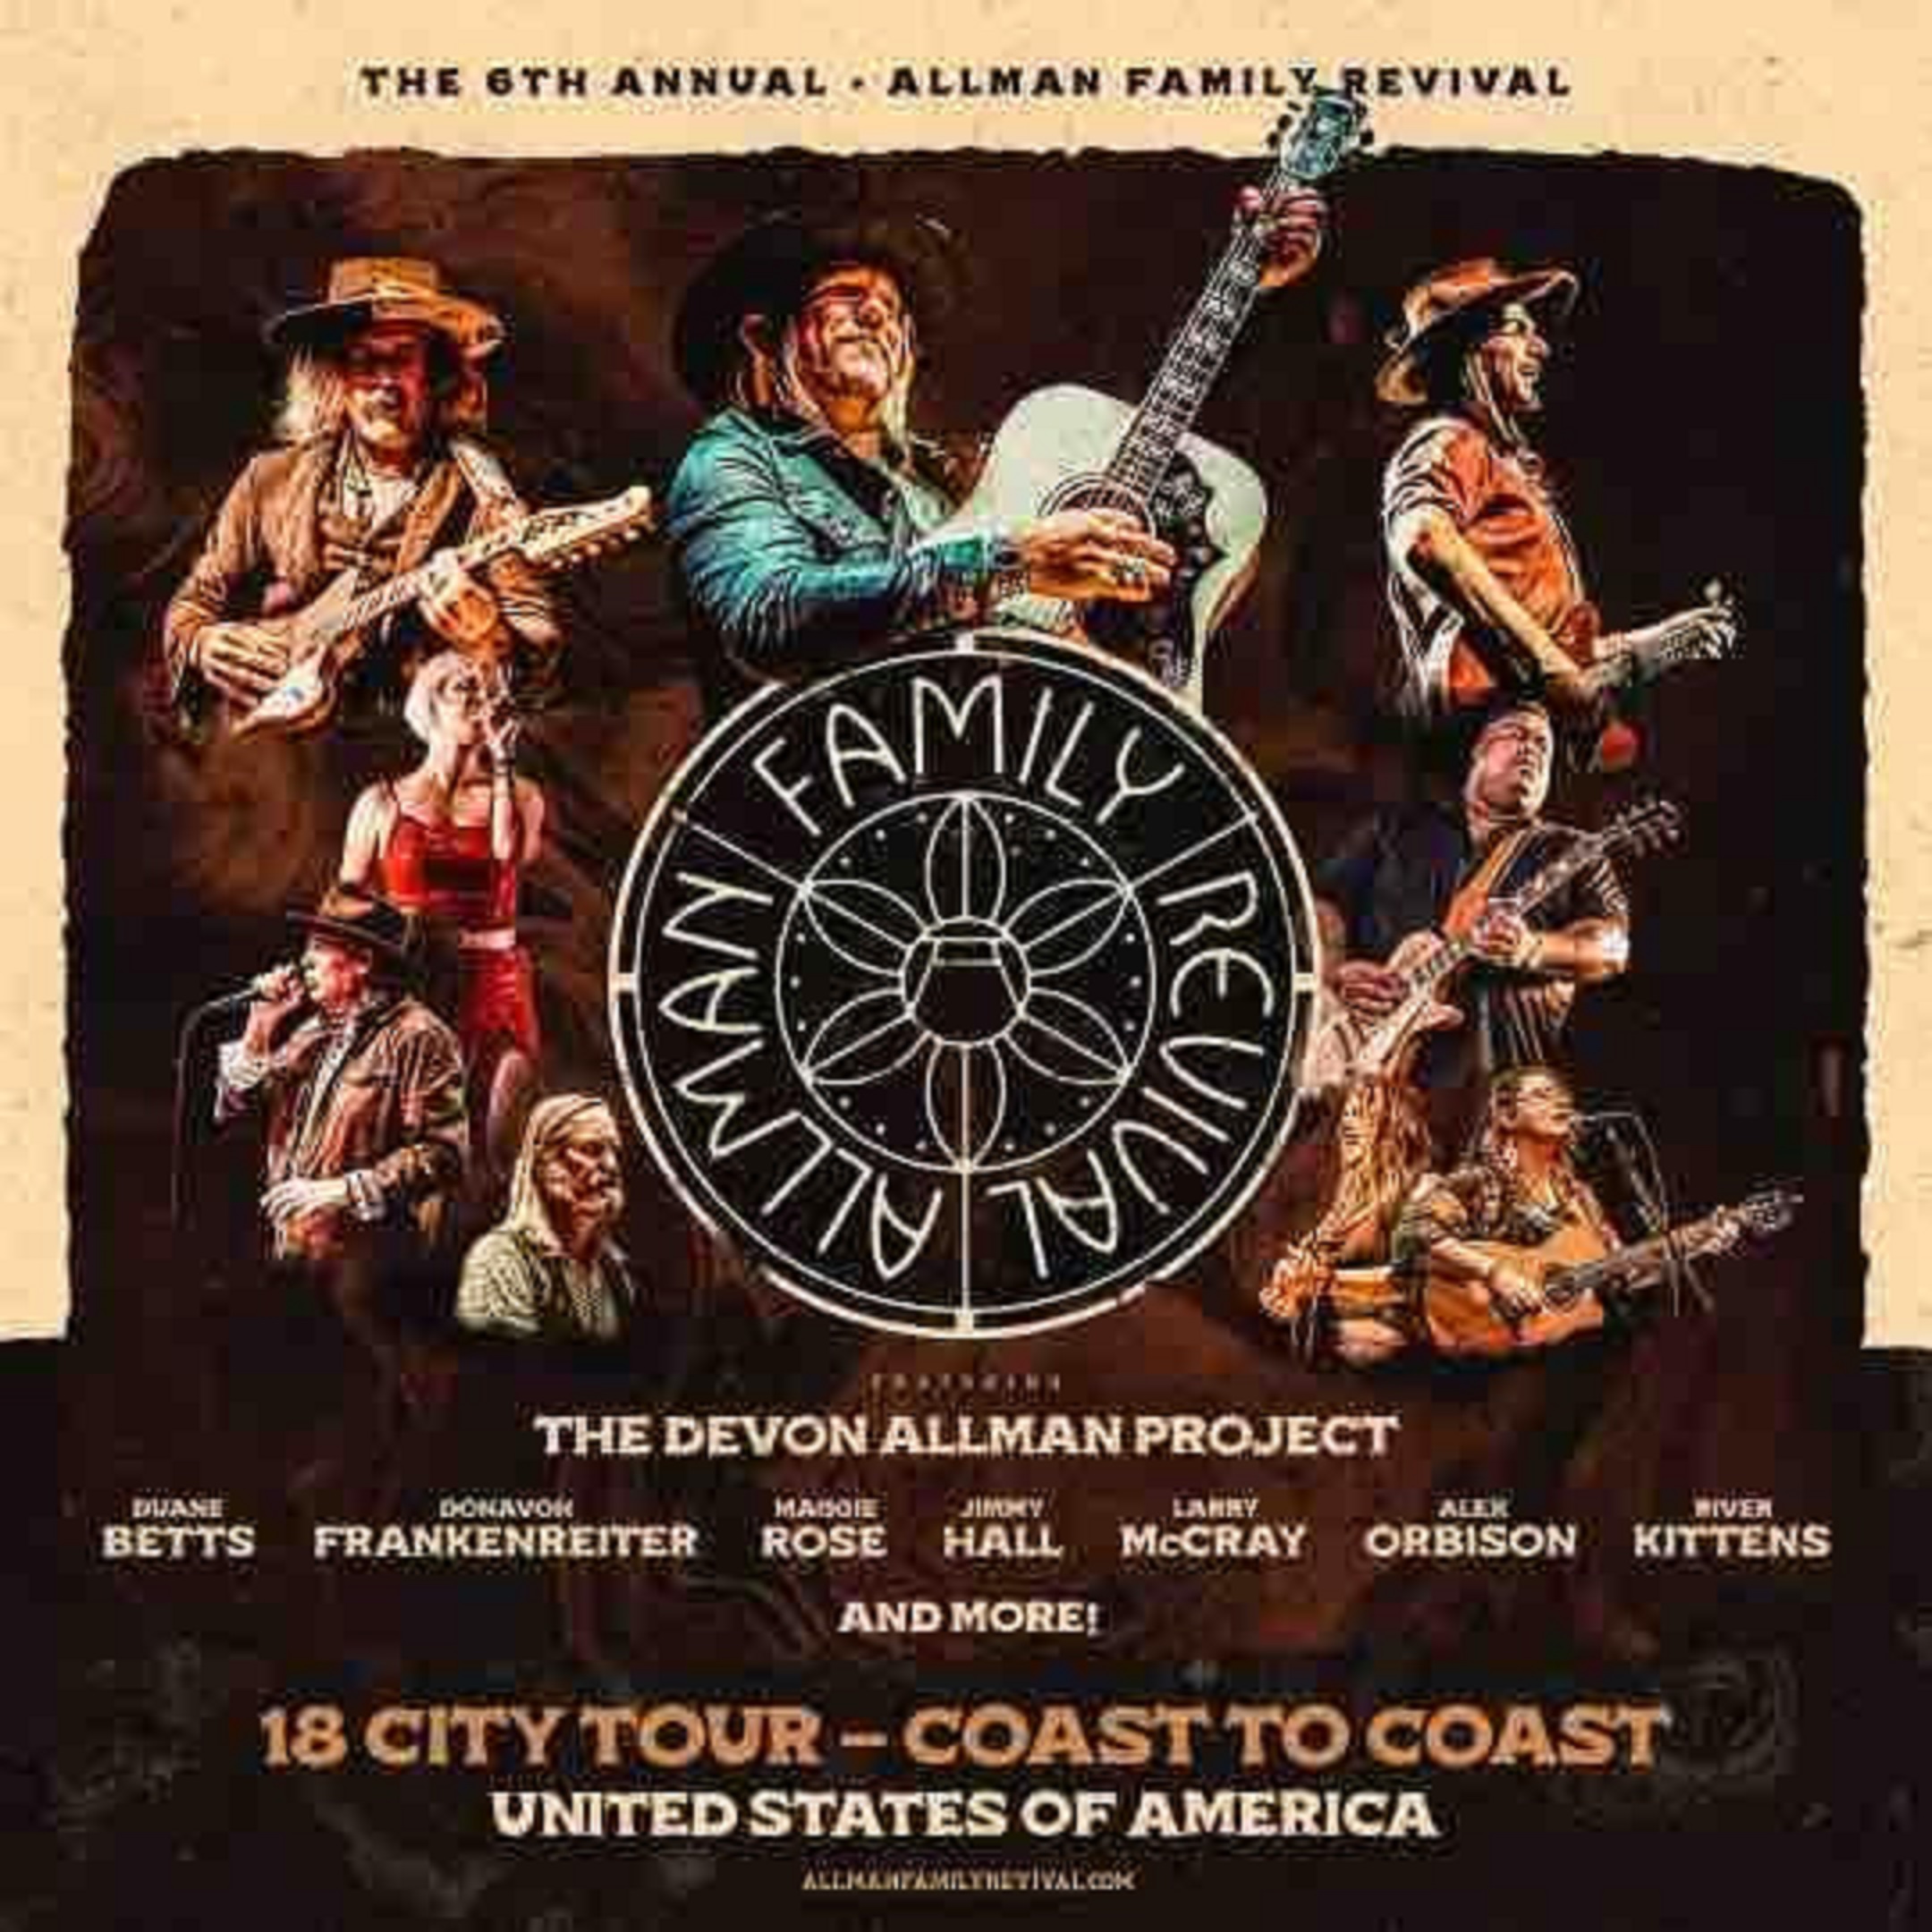 The Allman Family Revival adds members of the Trucks family and more to 2022 tour